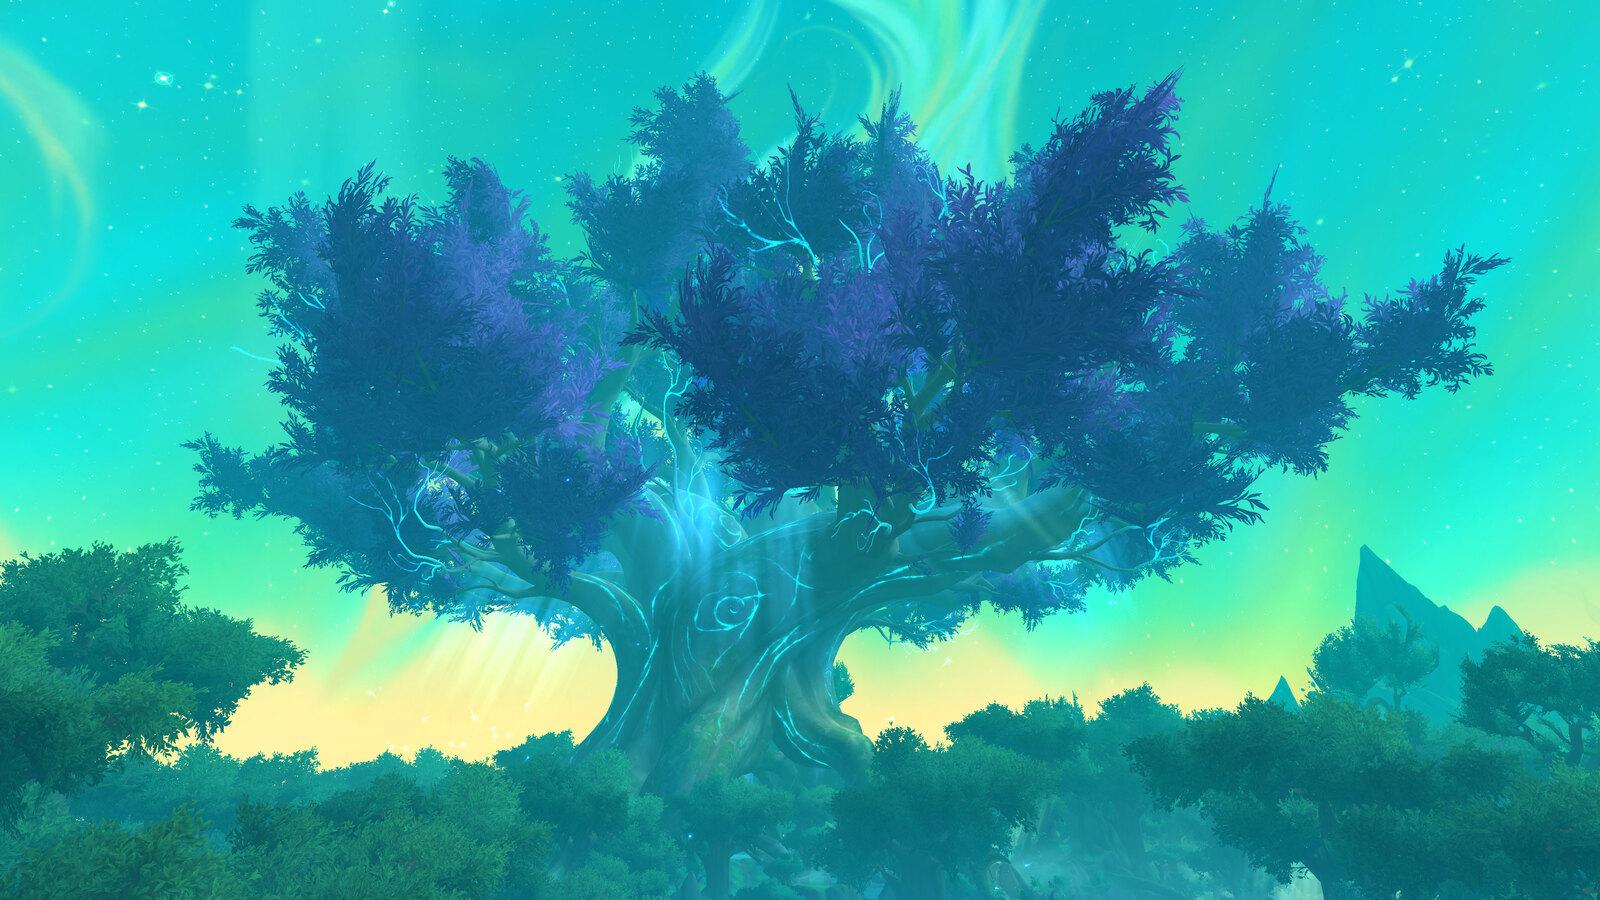 The Amirdrassil zone that plays host to the current WoW raid tier